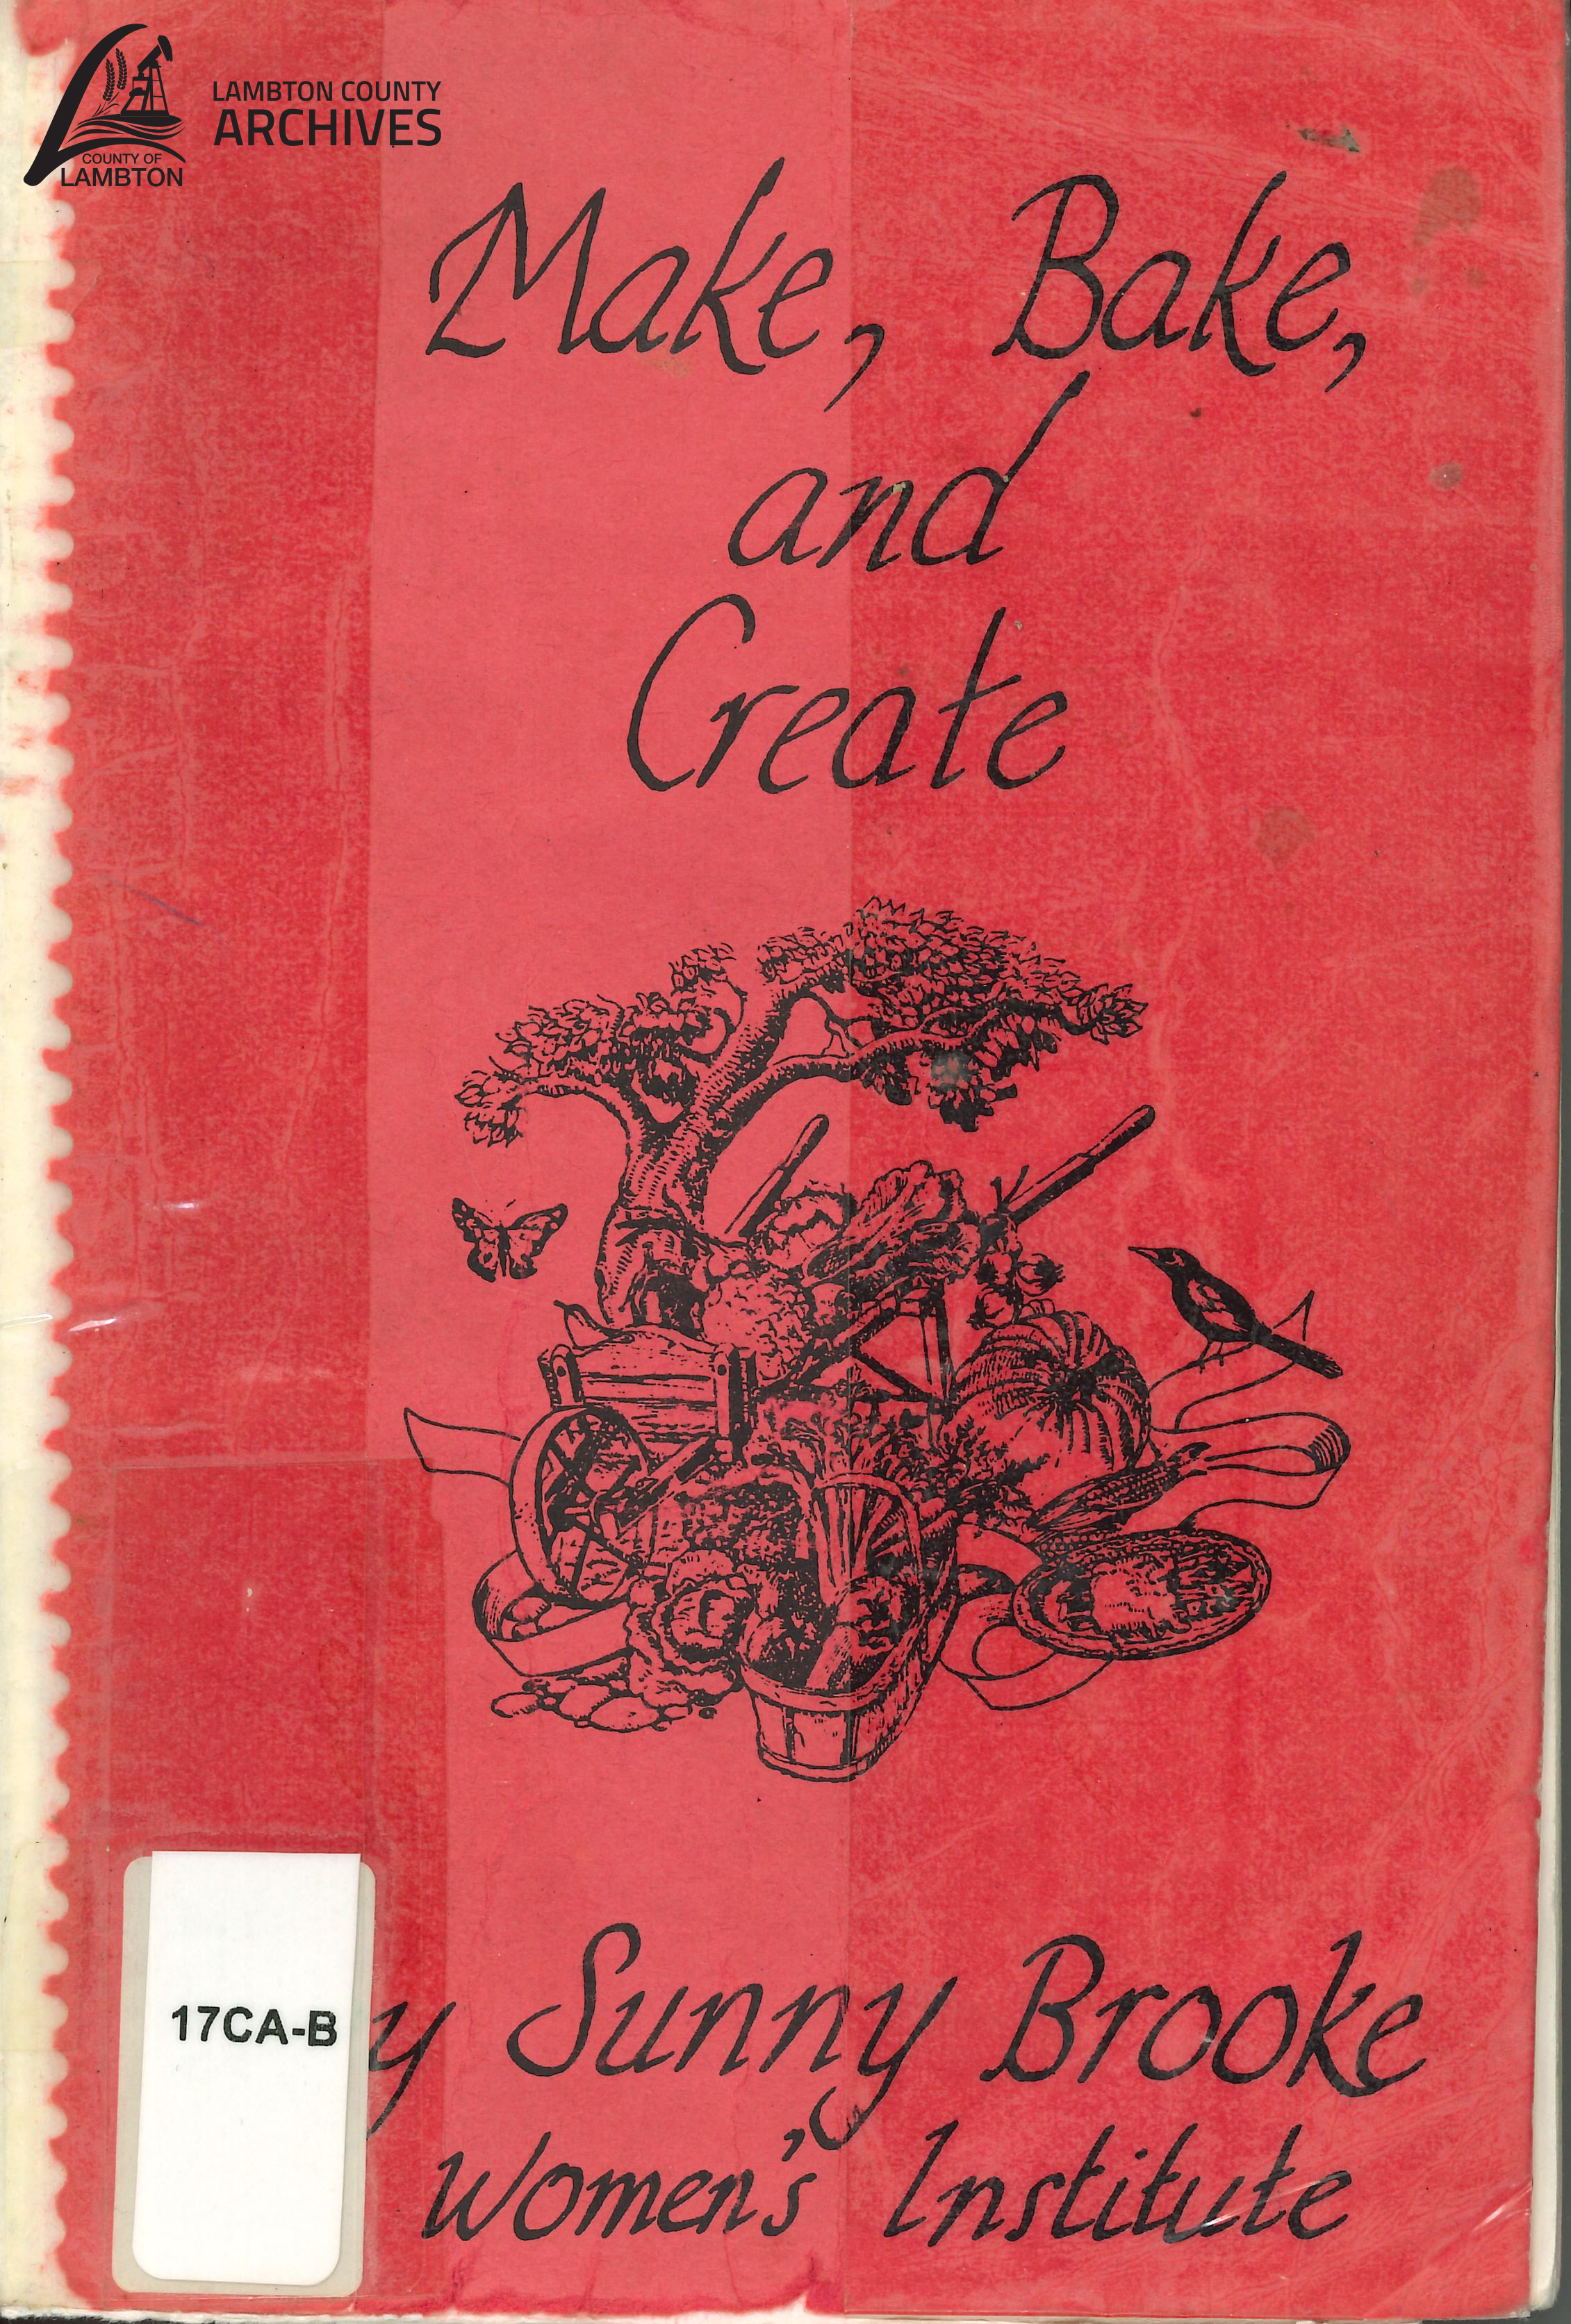 Cover of the "Make, Bake and Create" cookbook